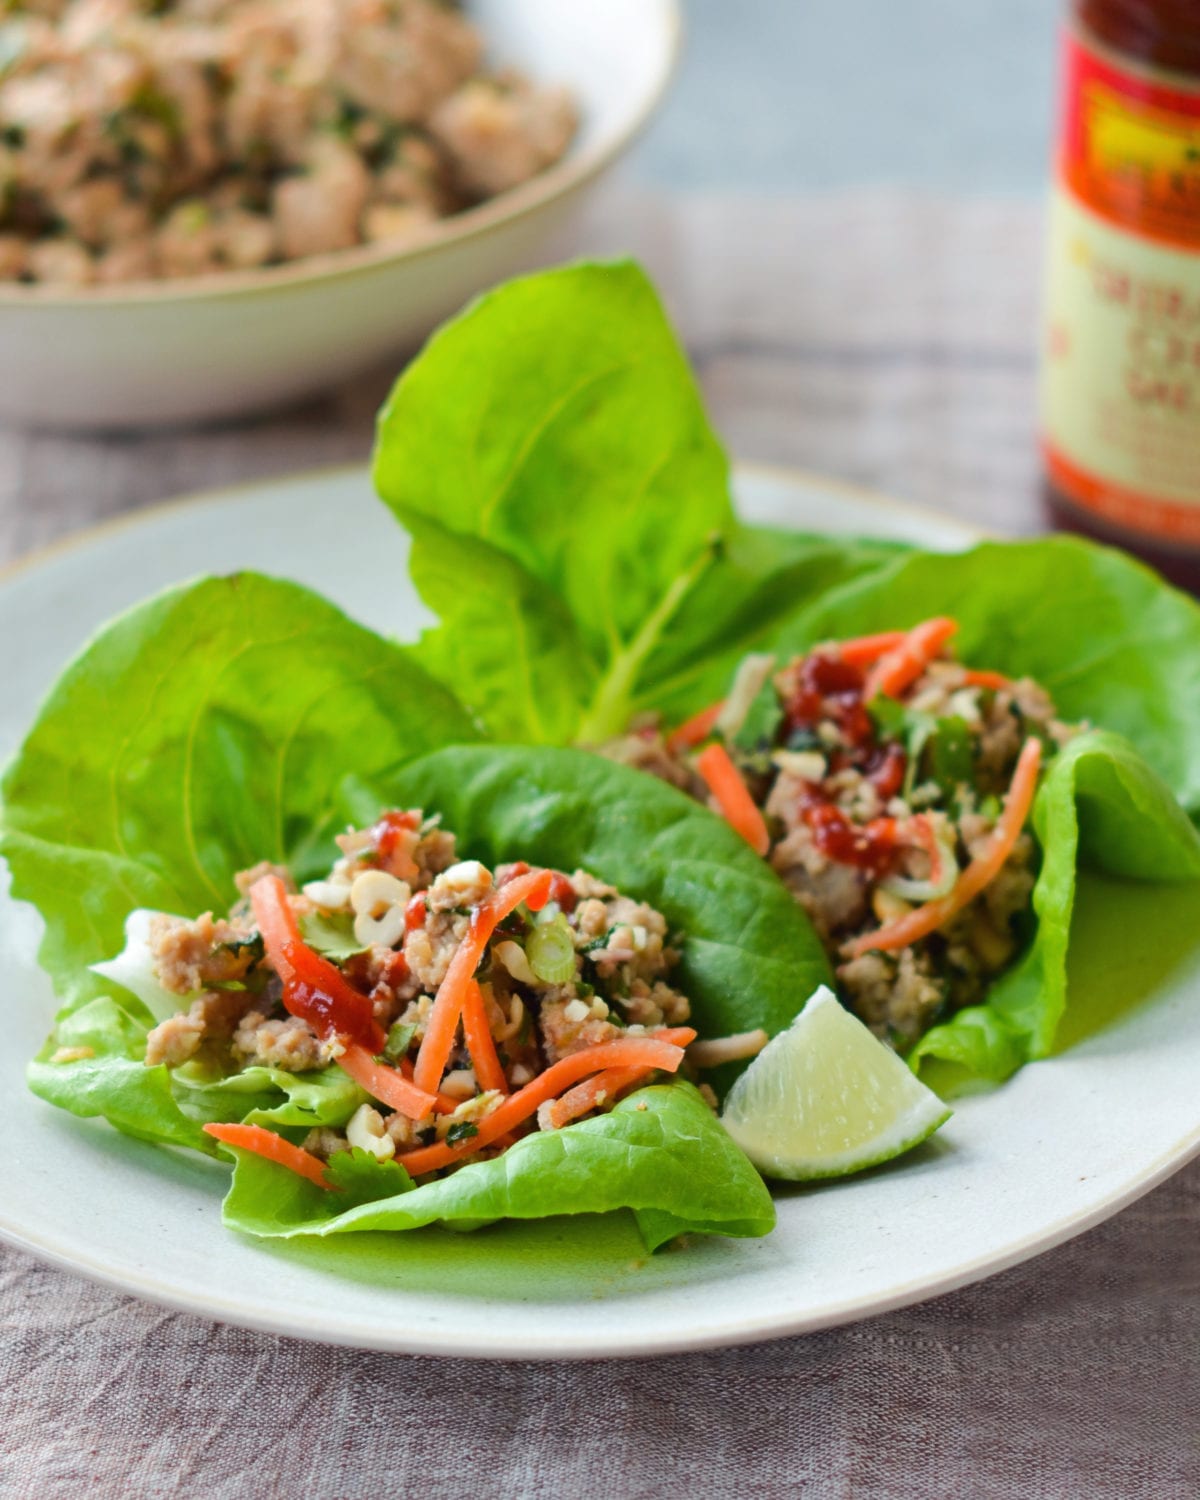 https://www.onceuponachef.com/images/2014/07/Thai-Style-Minced-Chicken-Lettuce-Cups-1200x1500.jpg